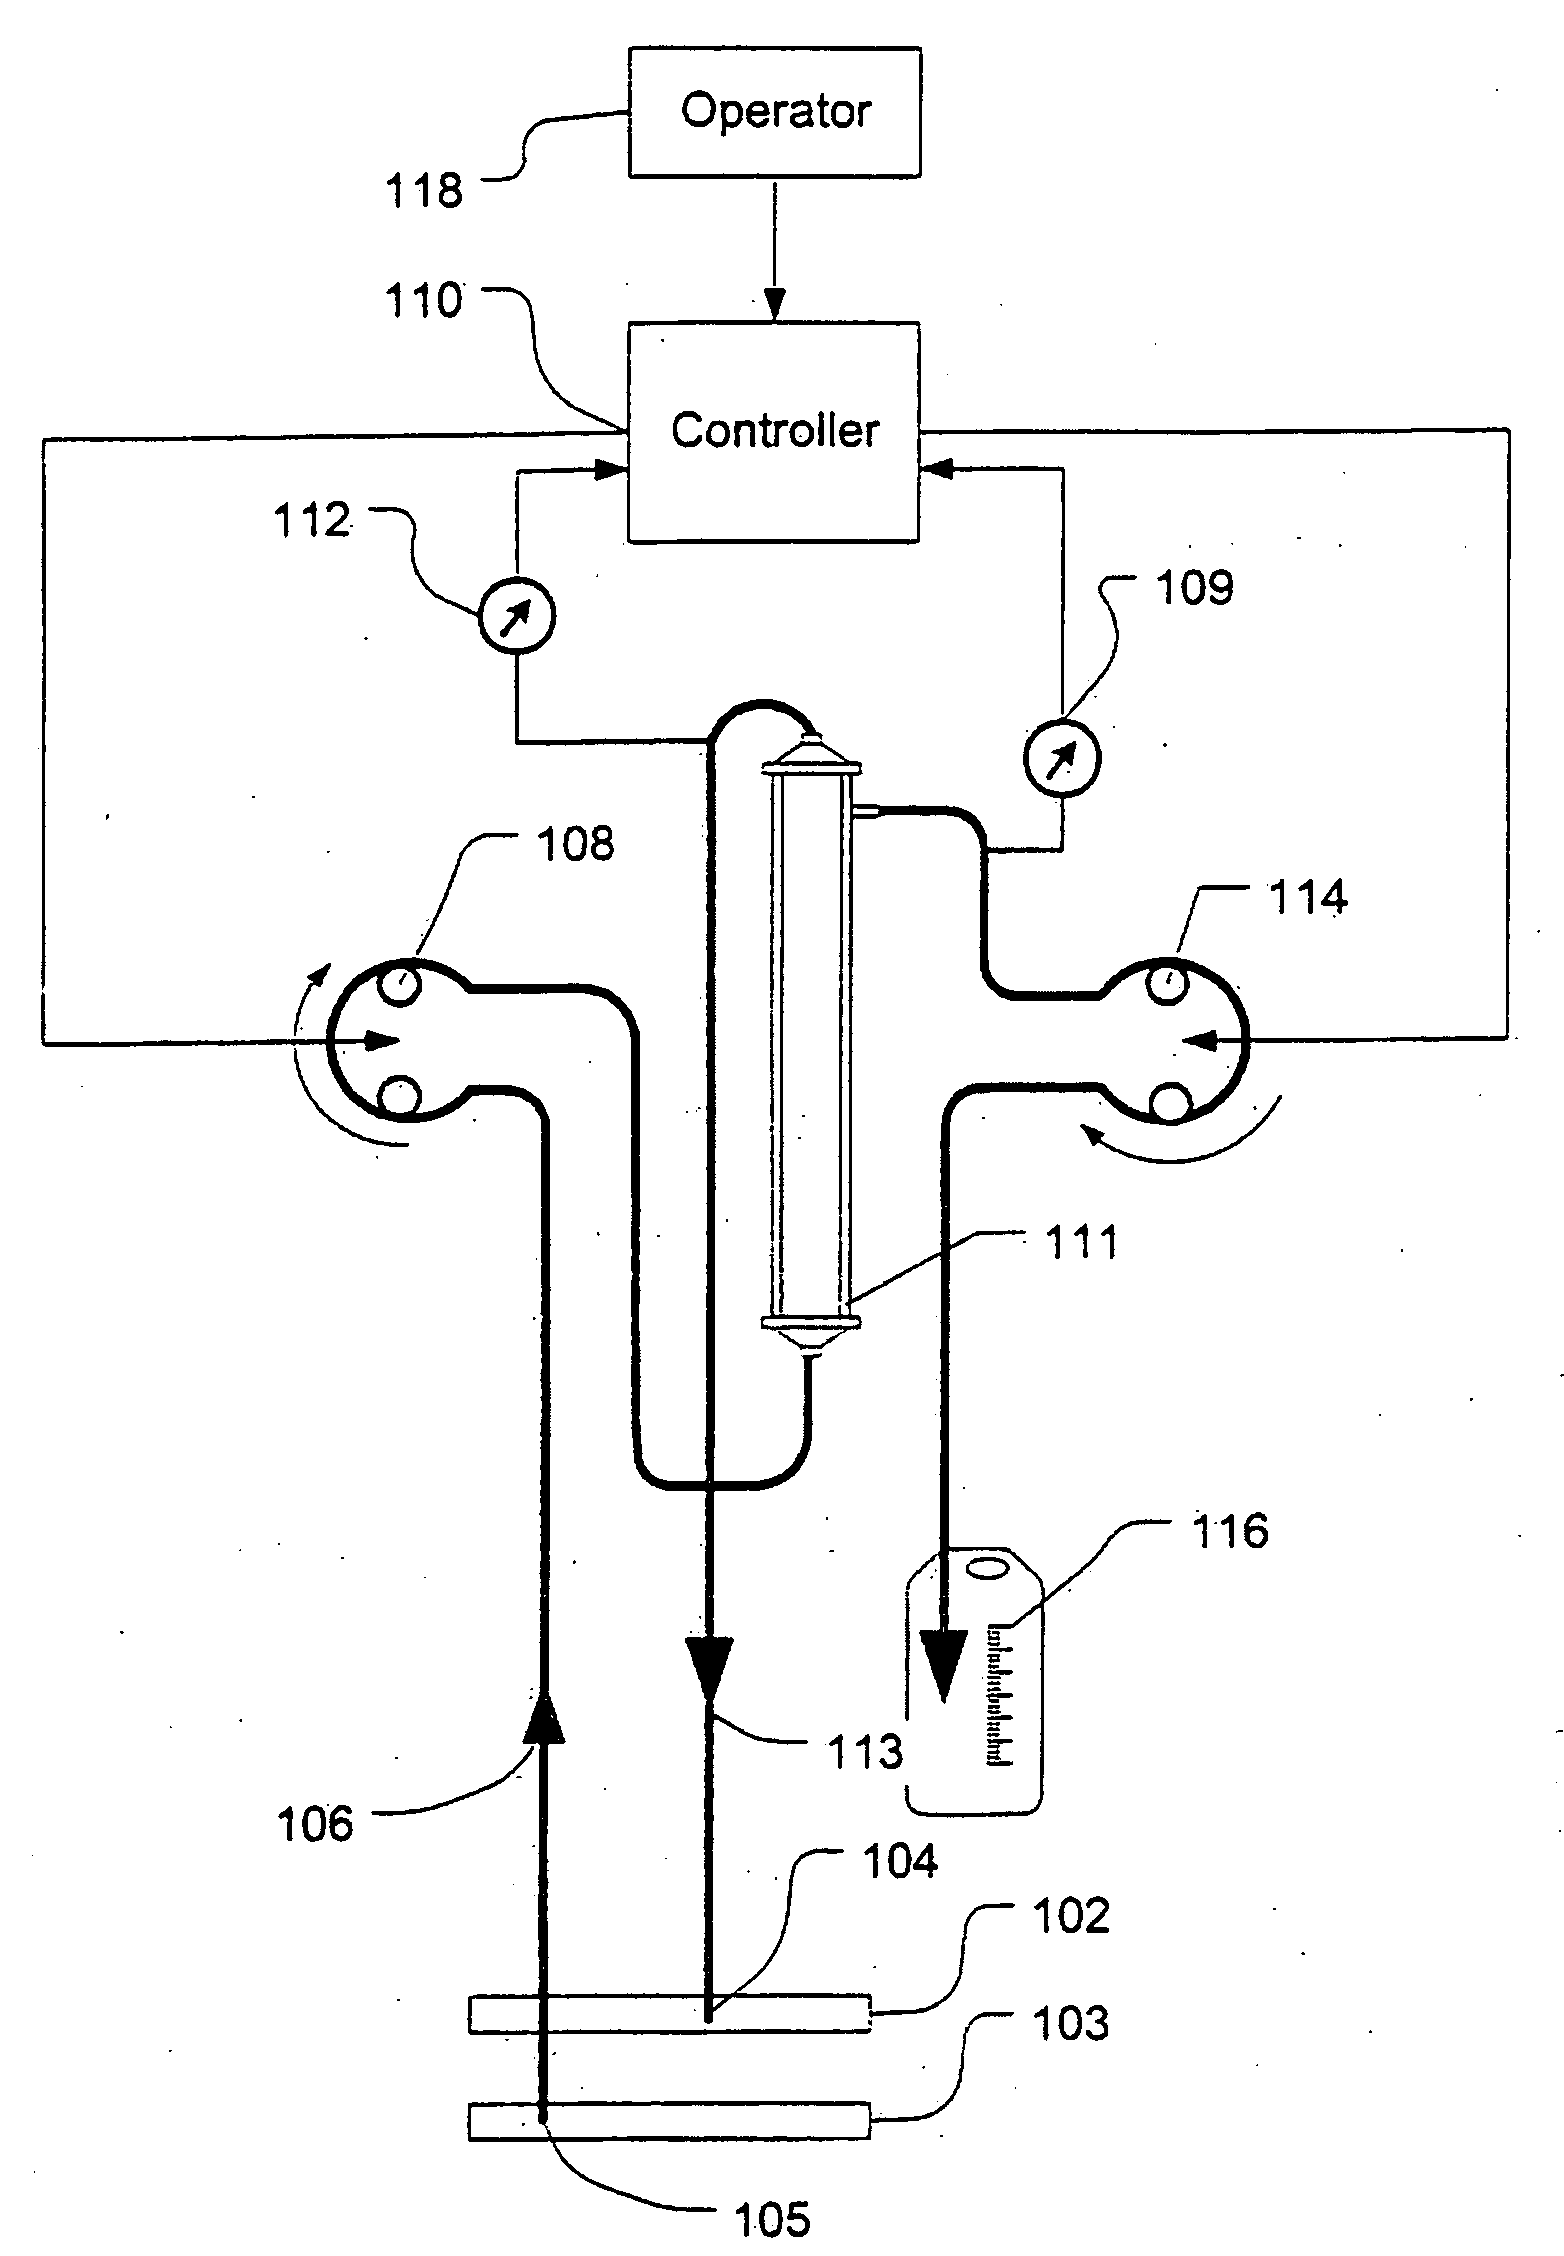 Controller for ultrafiltration blood circuit which prevents hypotension by monitoring osmotic pressure in blood